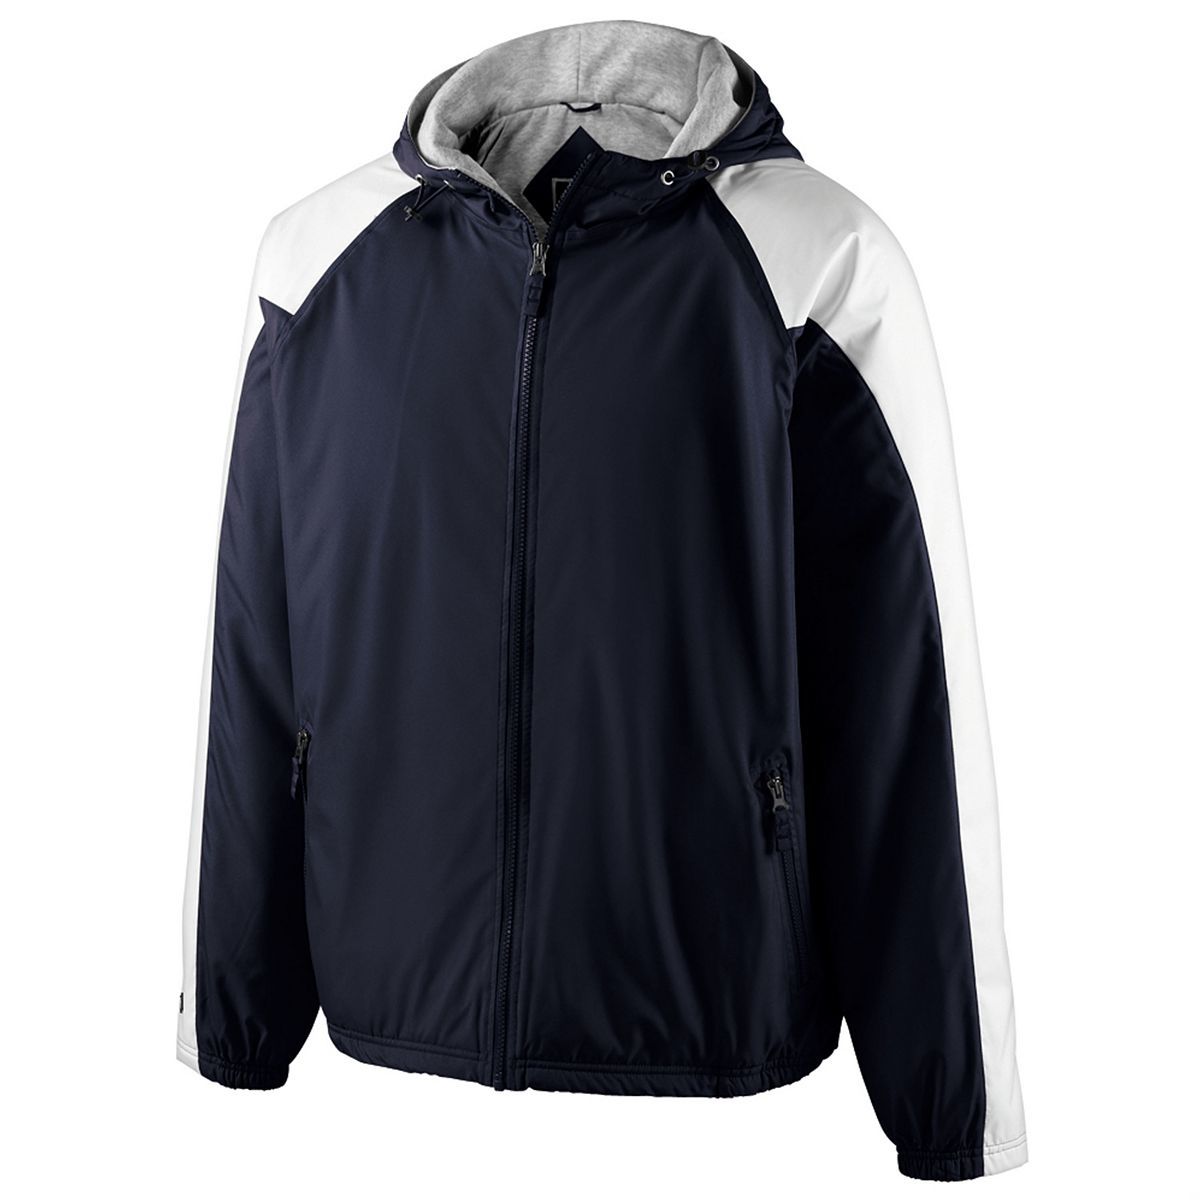 Youth Homefield Jacket - 229211